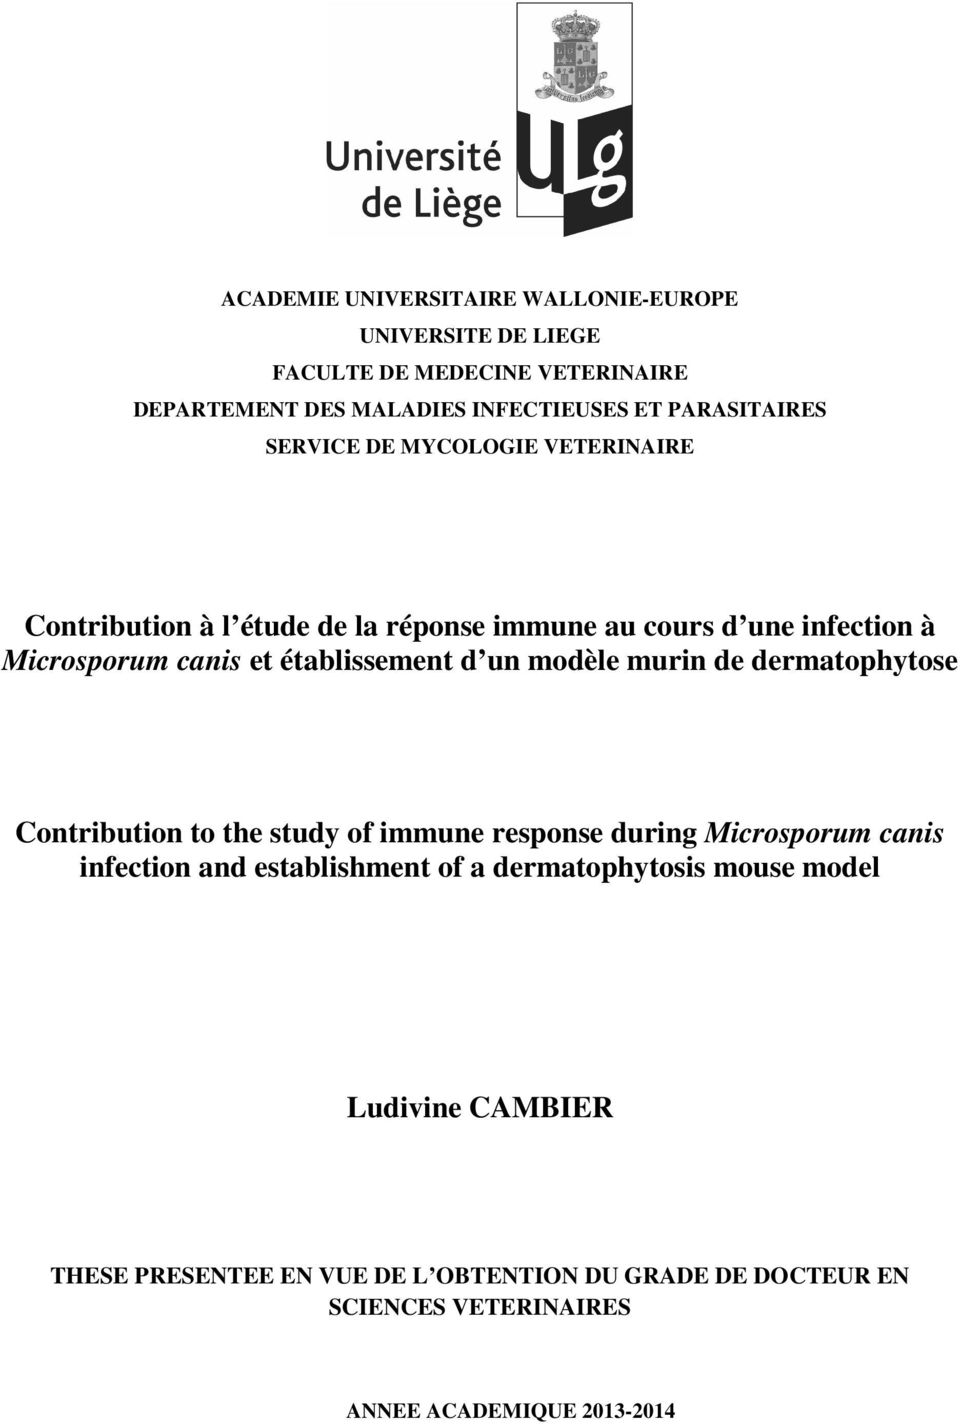 modèle murin de dermatophytose Contribution to the study of immune response during Microsporum canis infection and establishment of a